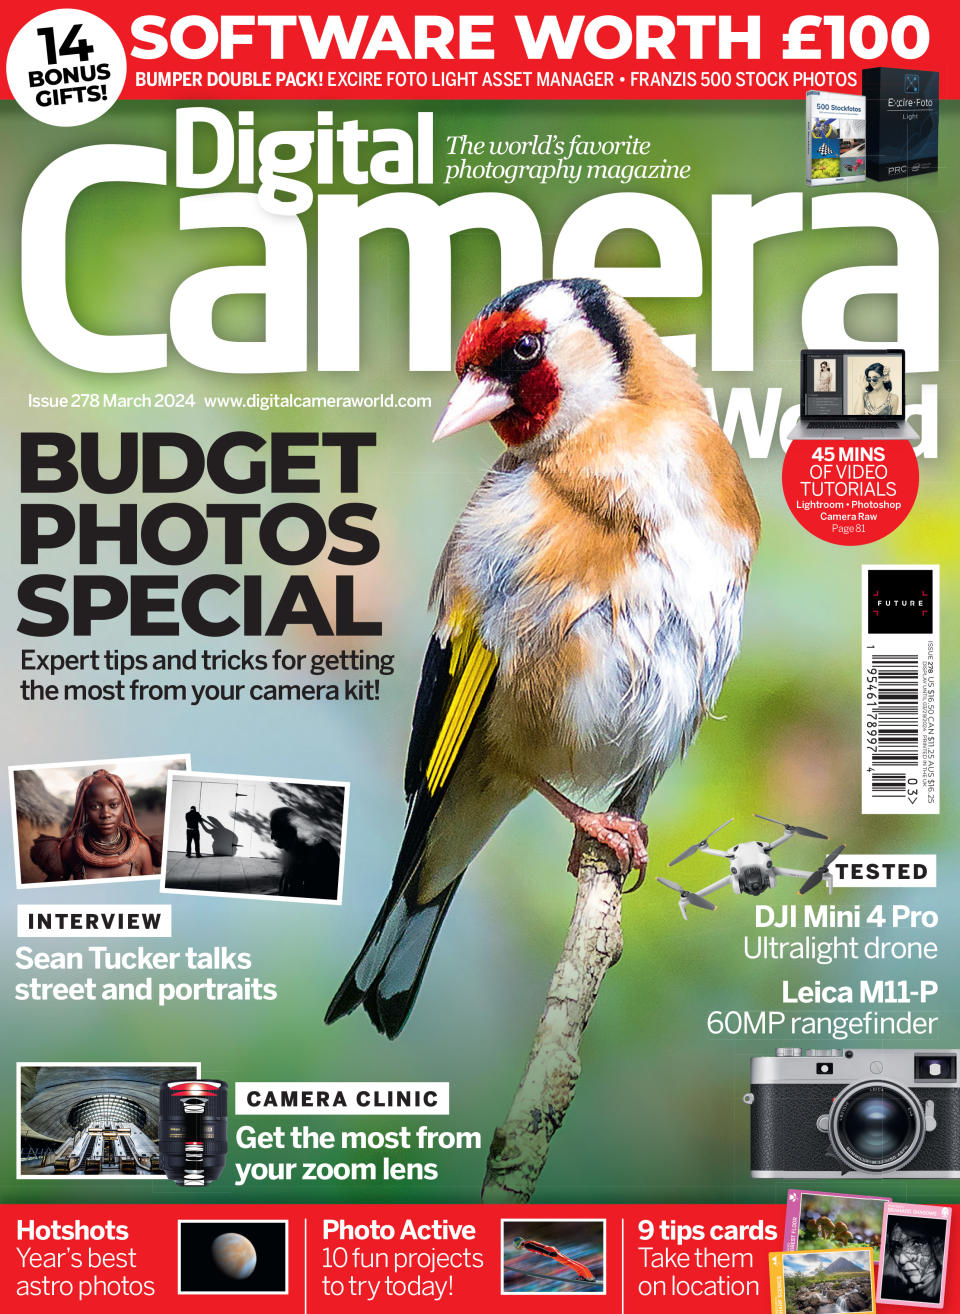 Front cover image of Digital Camera magazine issue 278 (March 2024)